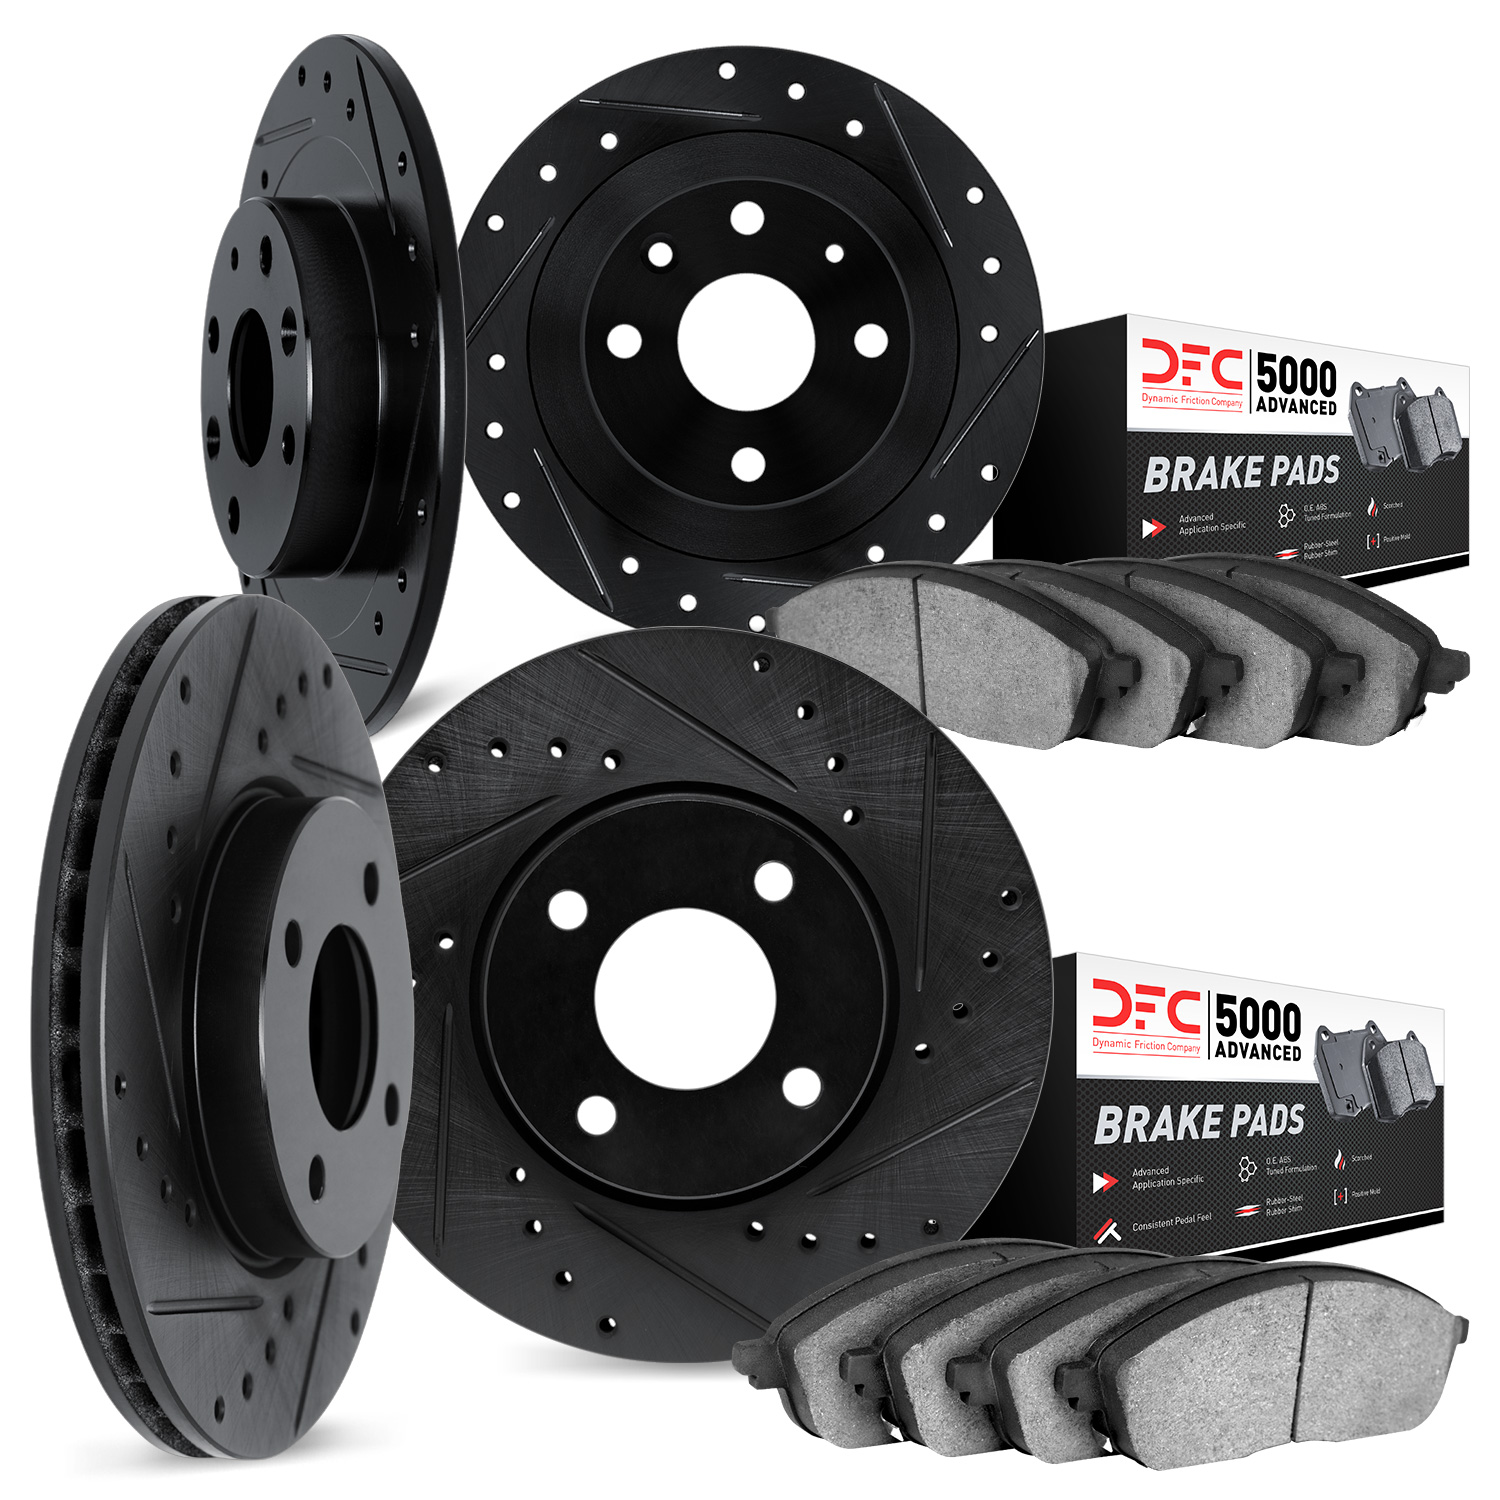 8504-32000 Drilled/Slotted Brake Rotors w/5000 Advanced Brake Pads Kit [Black], 2002-2006 Mini, Position: Front and Rear